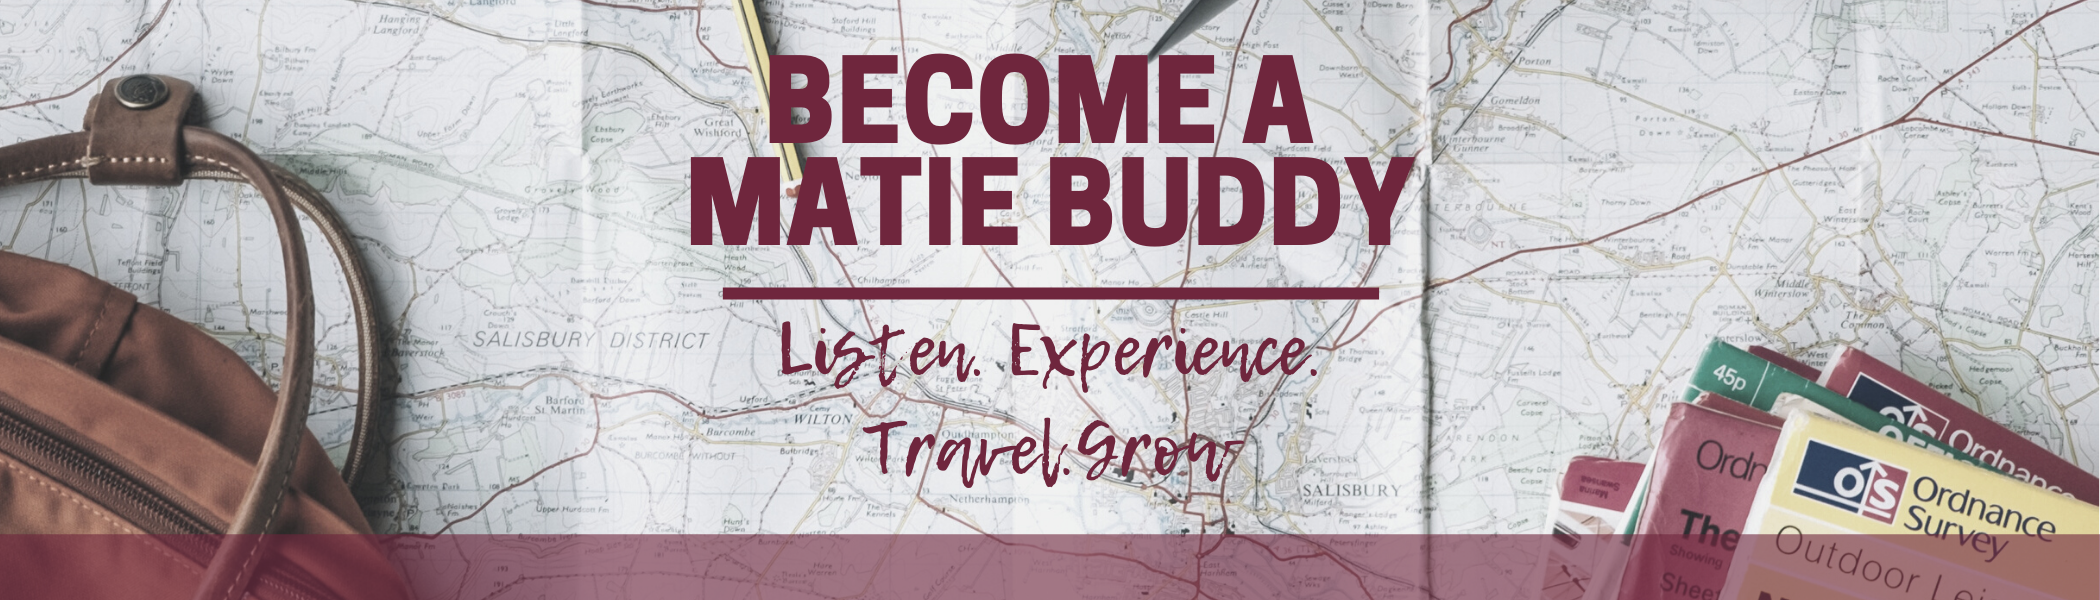 Apply to Become a Matie Buddy